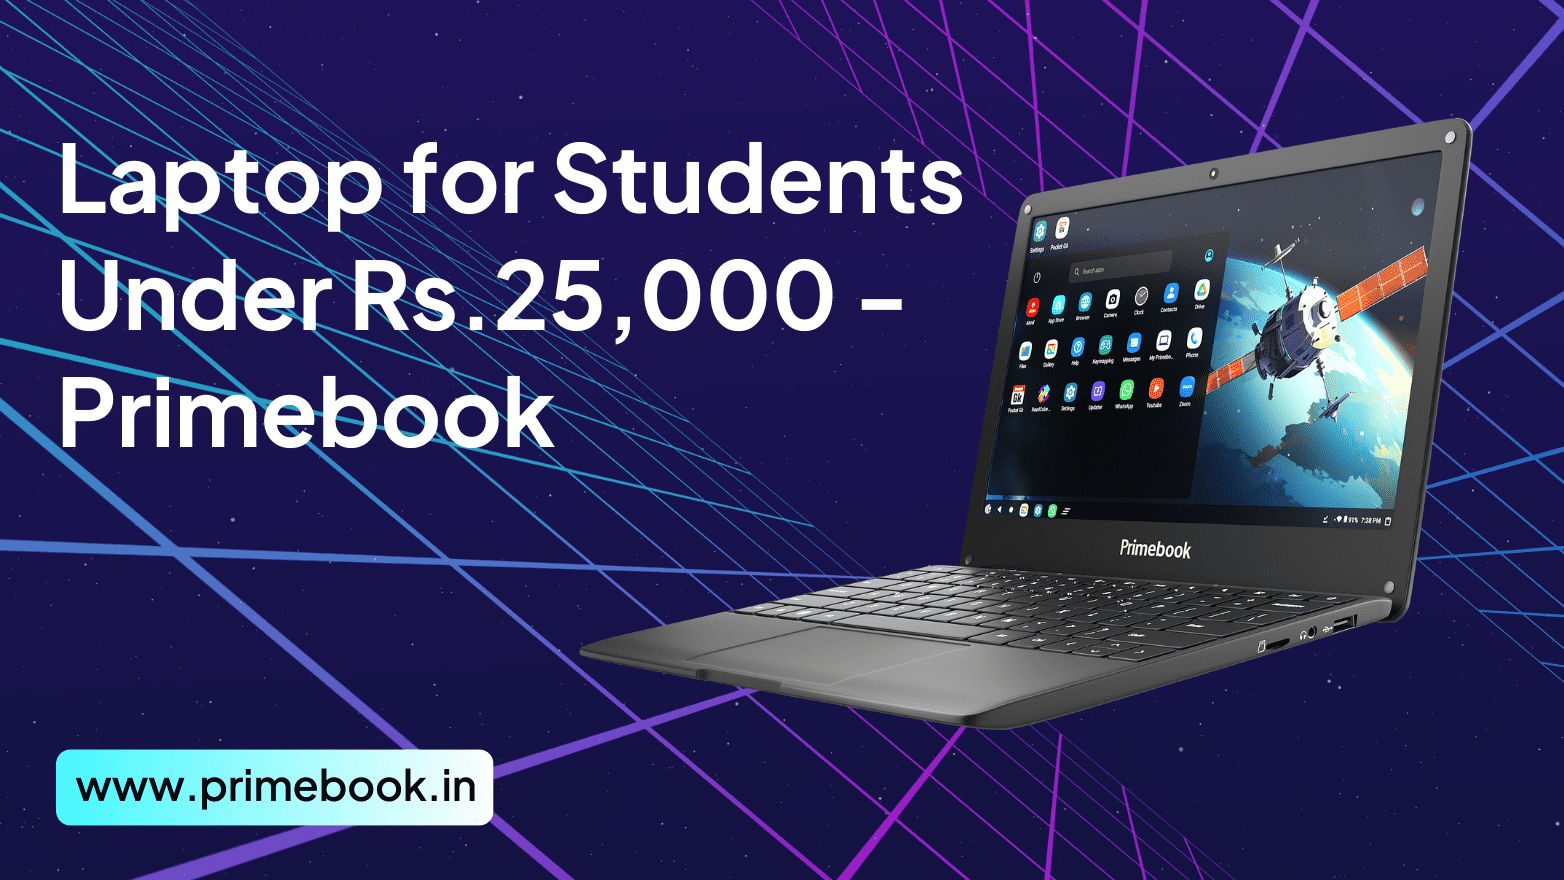 Best Laptop for Students Under Rs.25,000